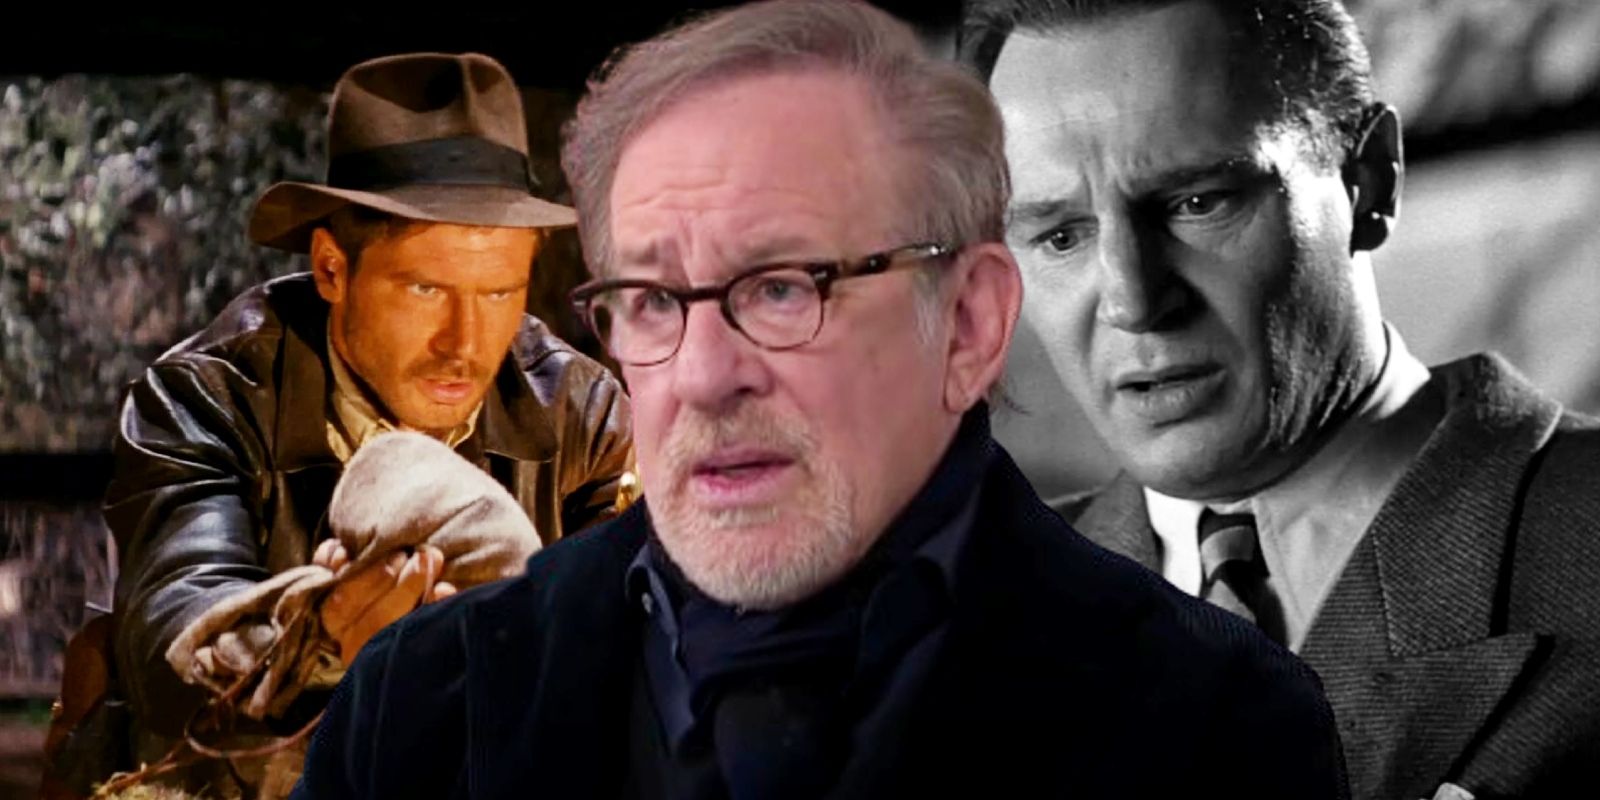 Steven Spielberg flanked by Harrison Ford as Indiana Jones and Liam Neeson as Oskar Schindler